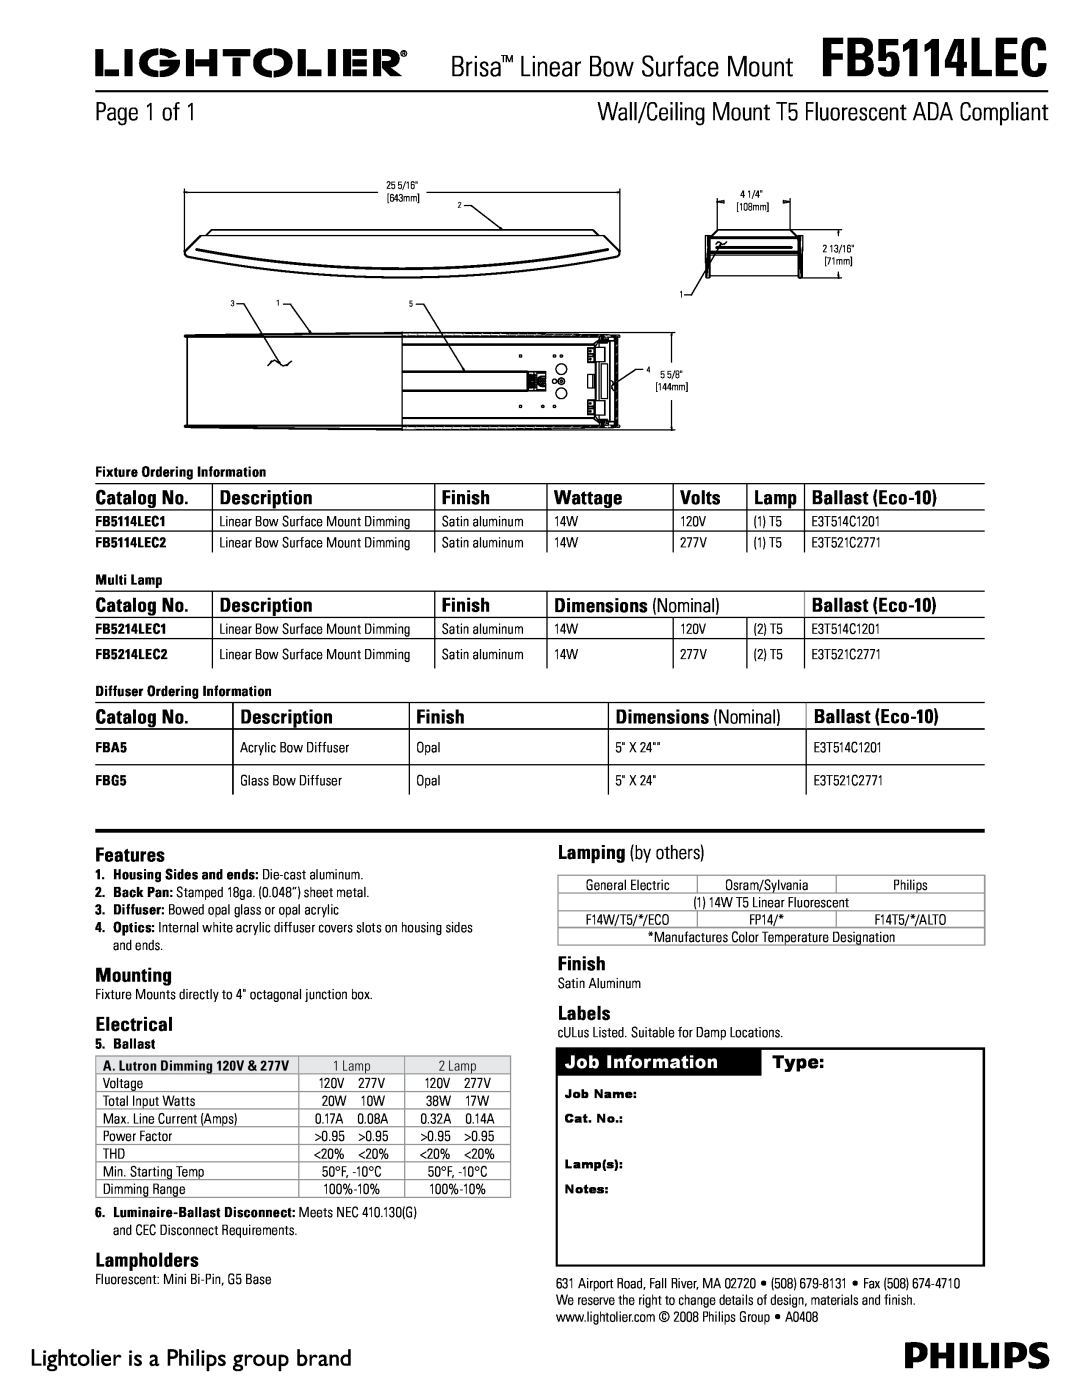 Lightolier FB5114LEC dimensions Page of, Wall/Ceiling Mount T5 Fluorescent ADA Compliant 